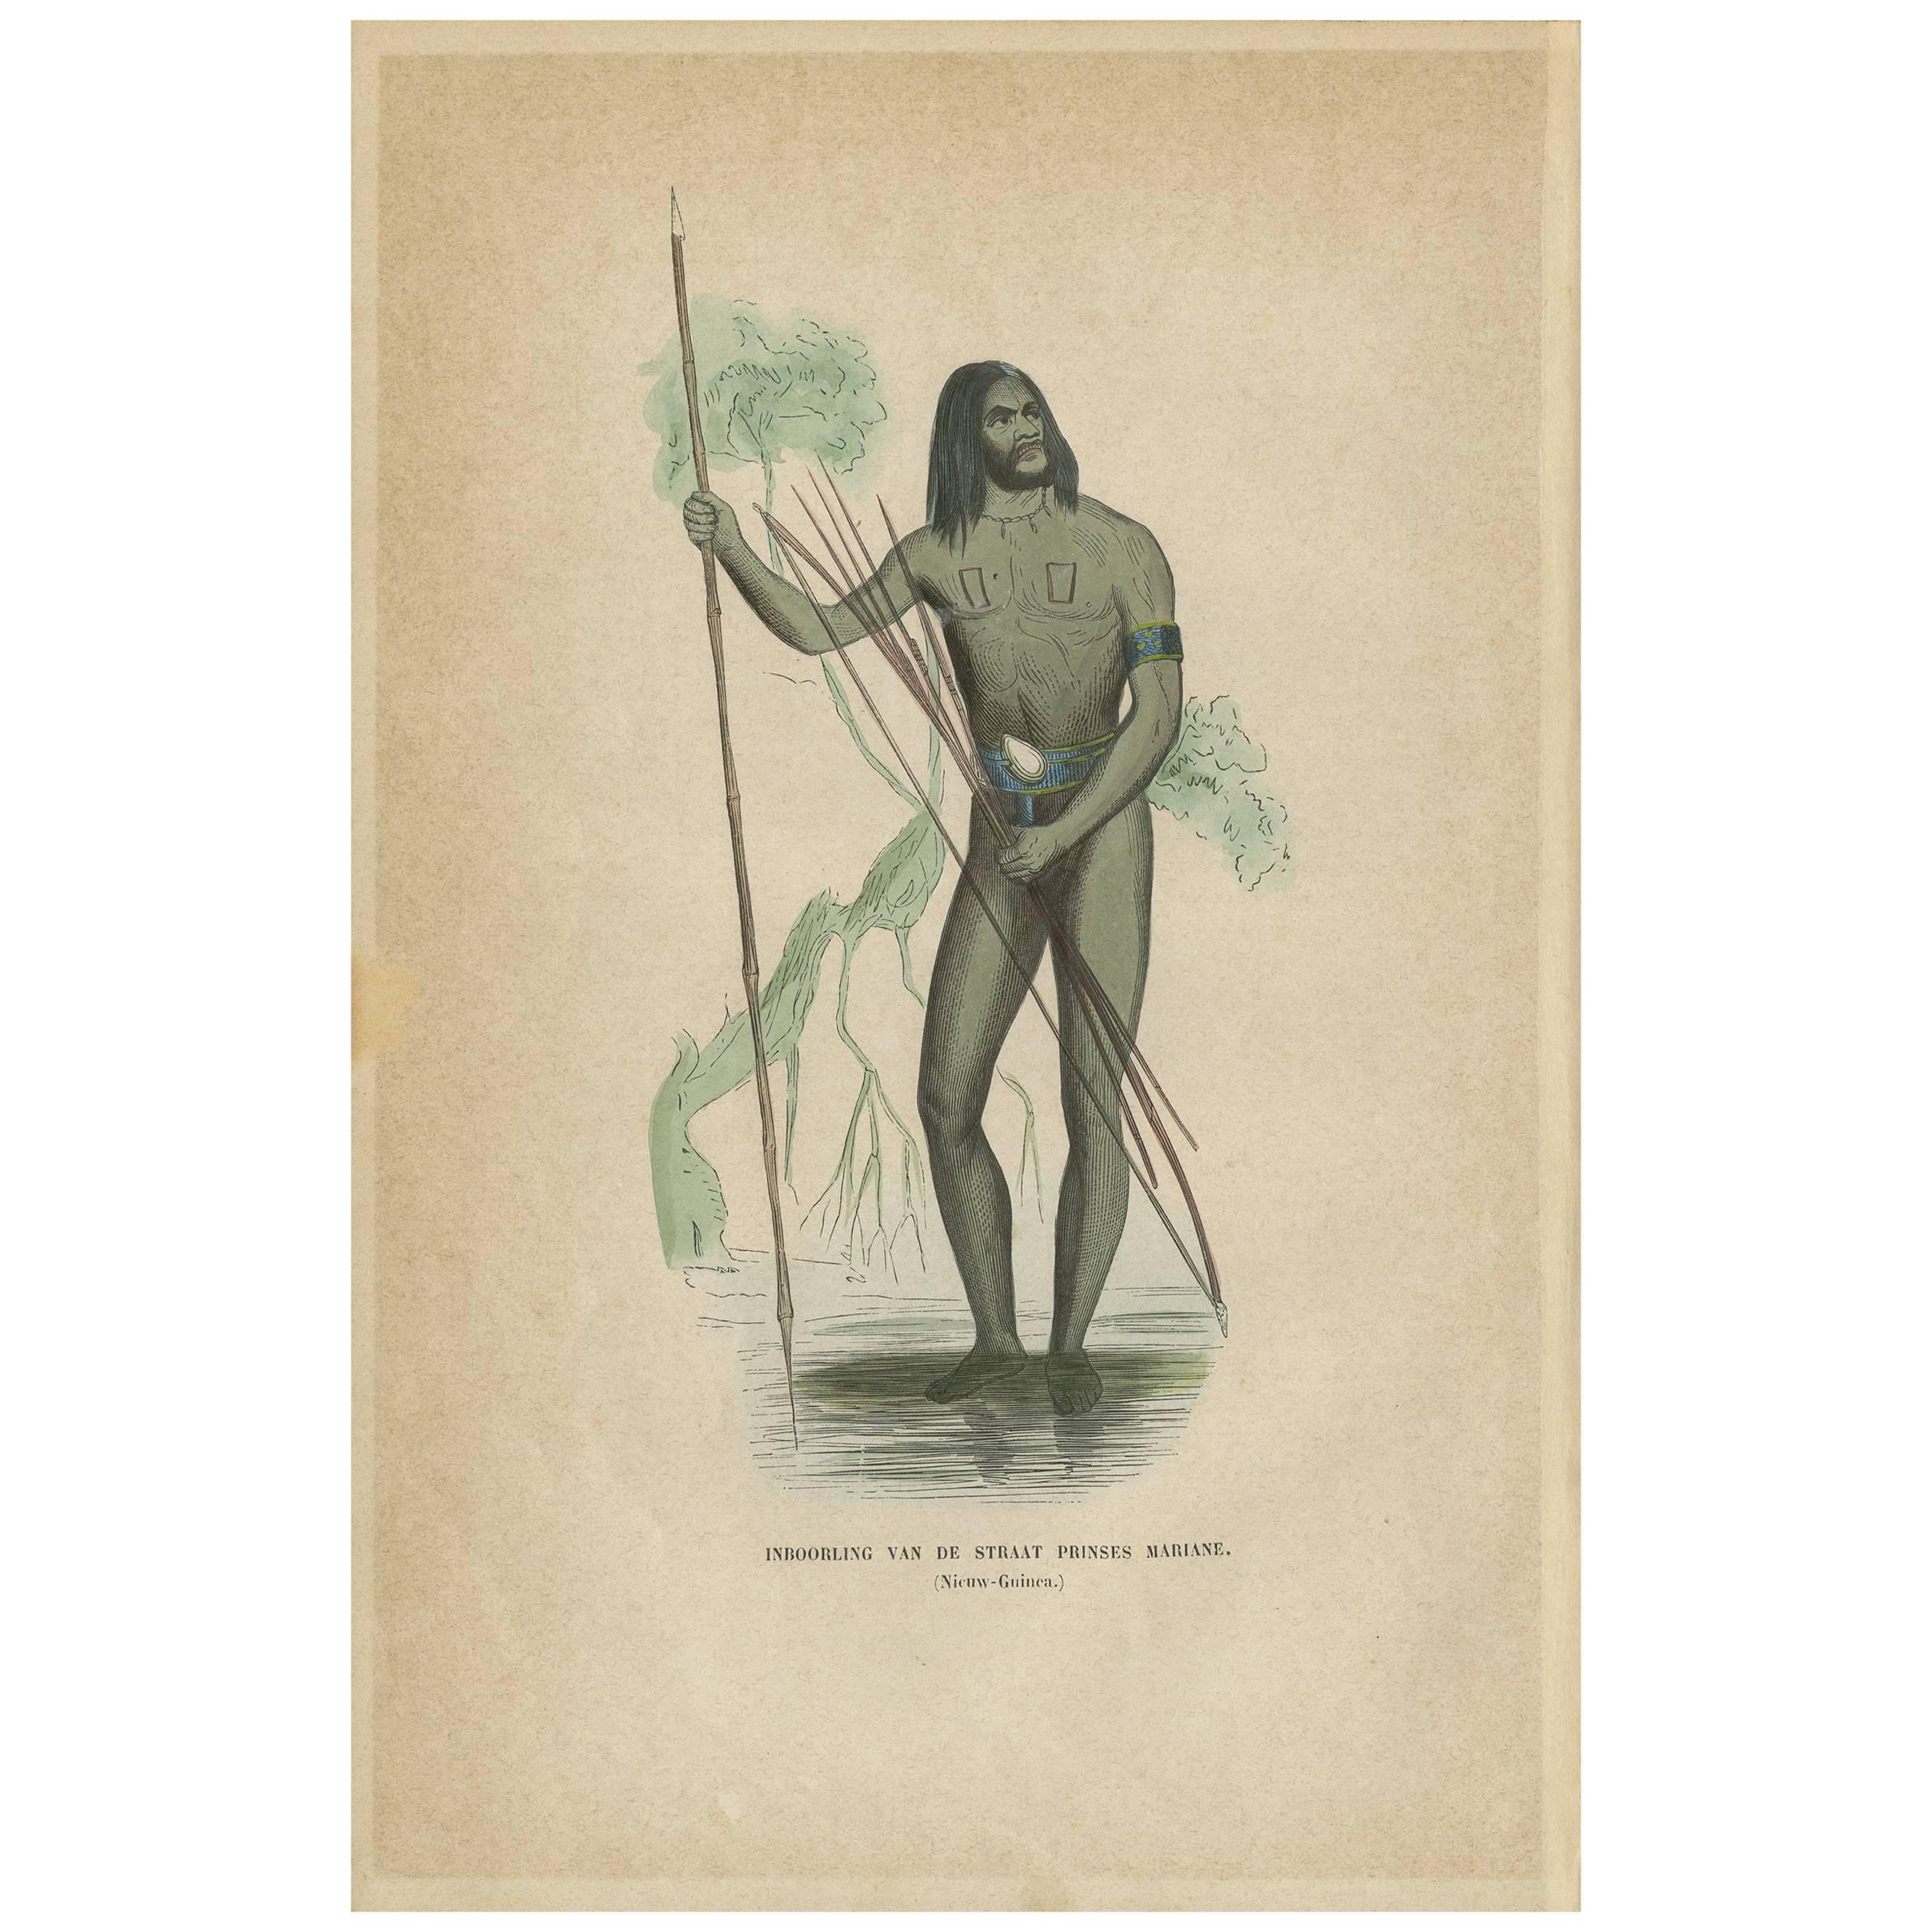 Antique Print of a Native from the Princess Marianne Strait by H. Berghaus, 1855